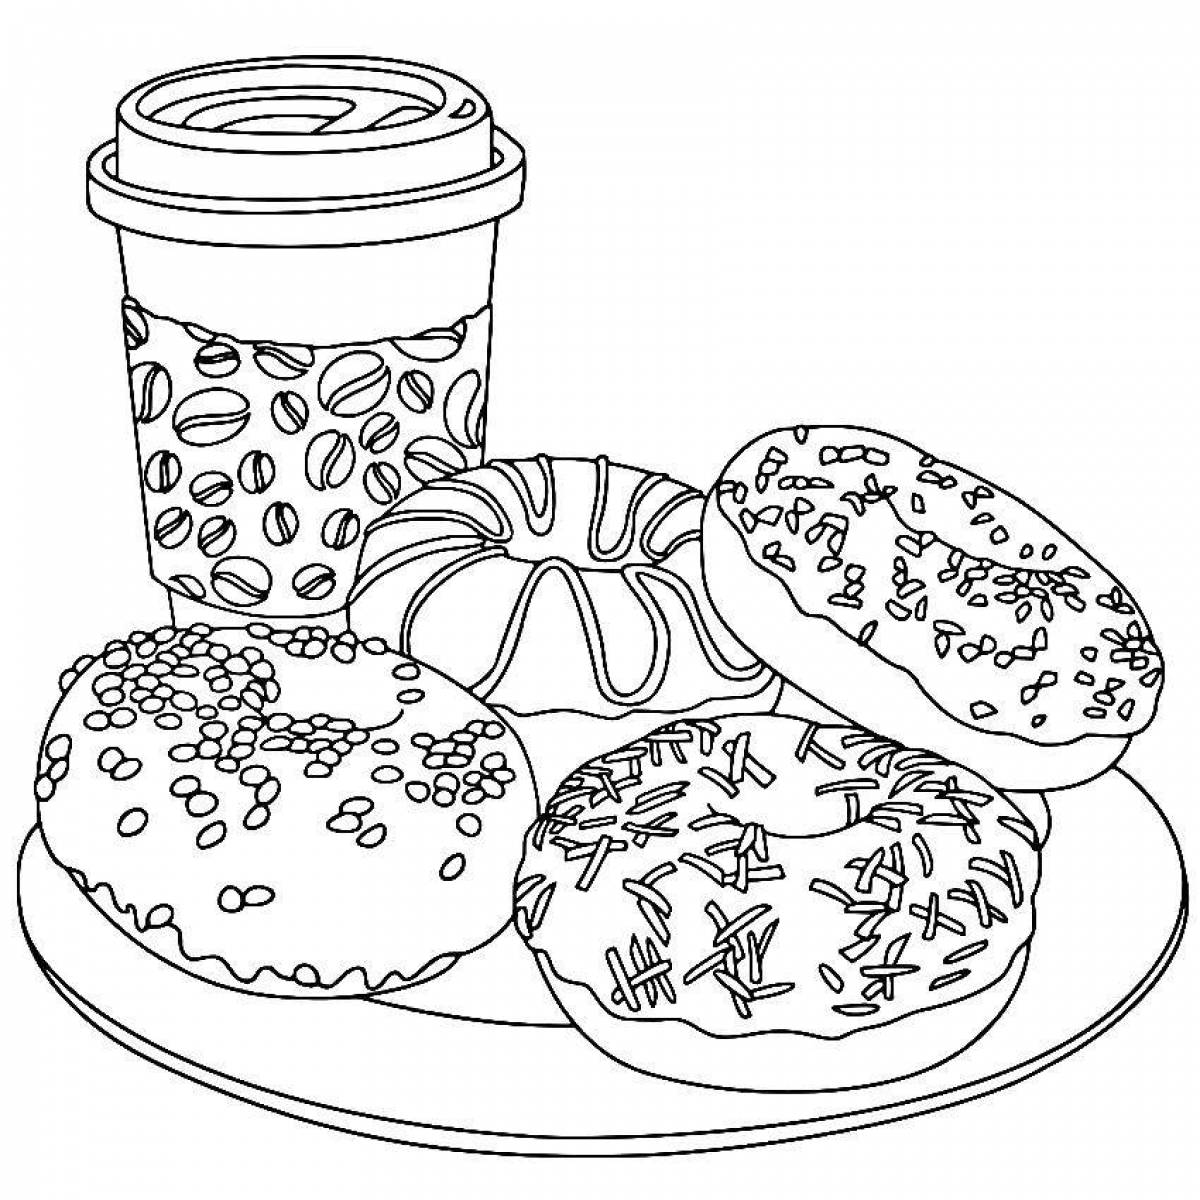 Blessed hagi waghi coloring page